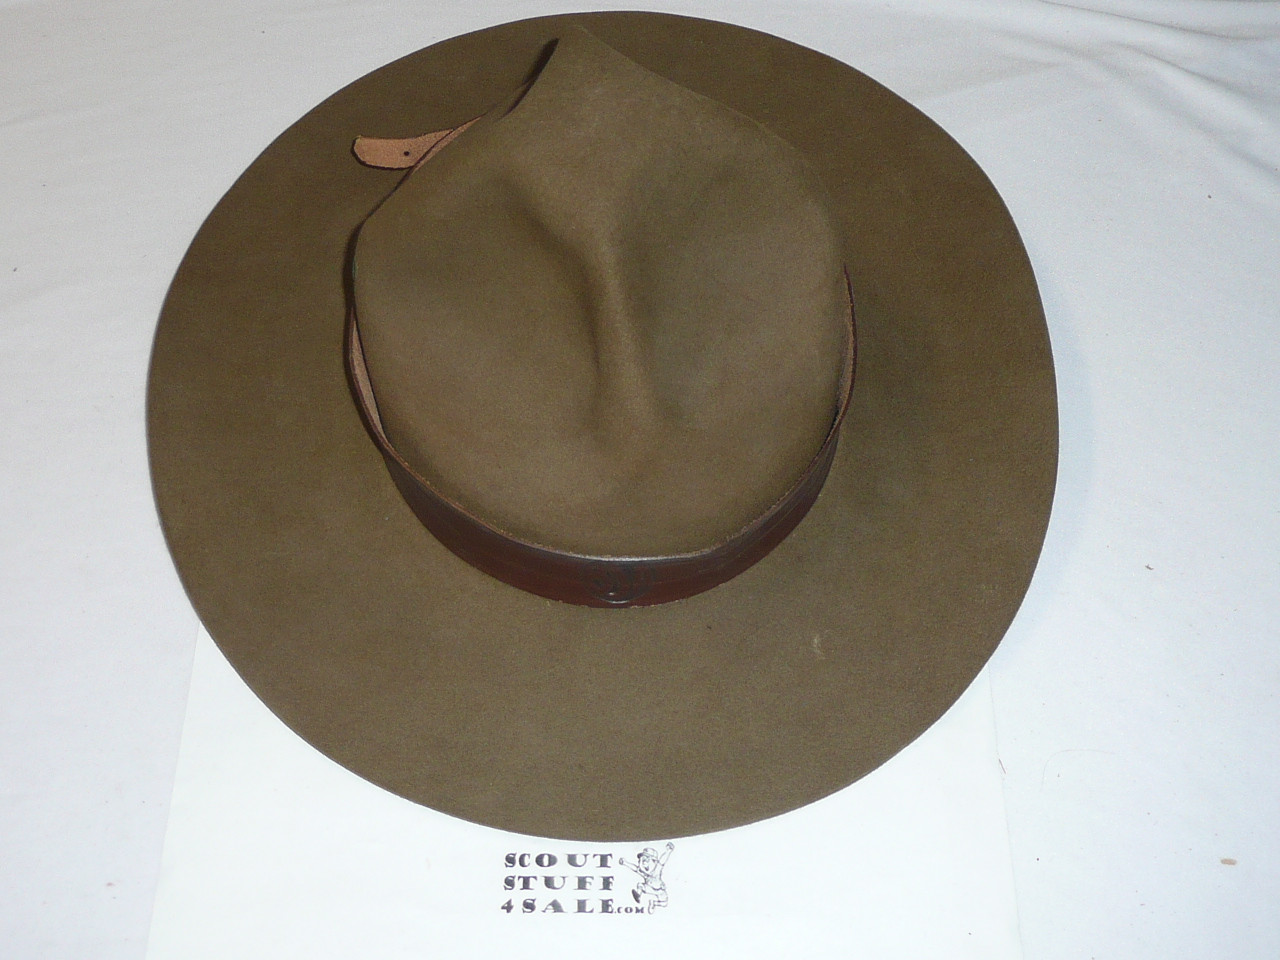 Official Boy Scout "Scout Master"Campaign Hat (Smokey the Bear hat), has storage board, Like new but internal leather band is separating from stiching